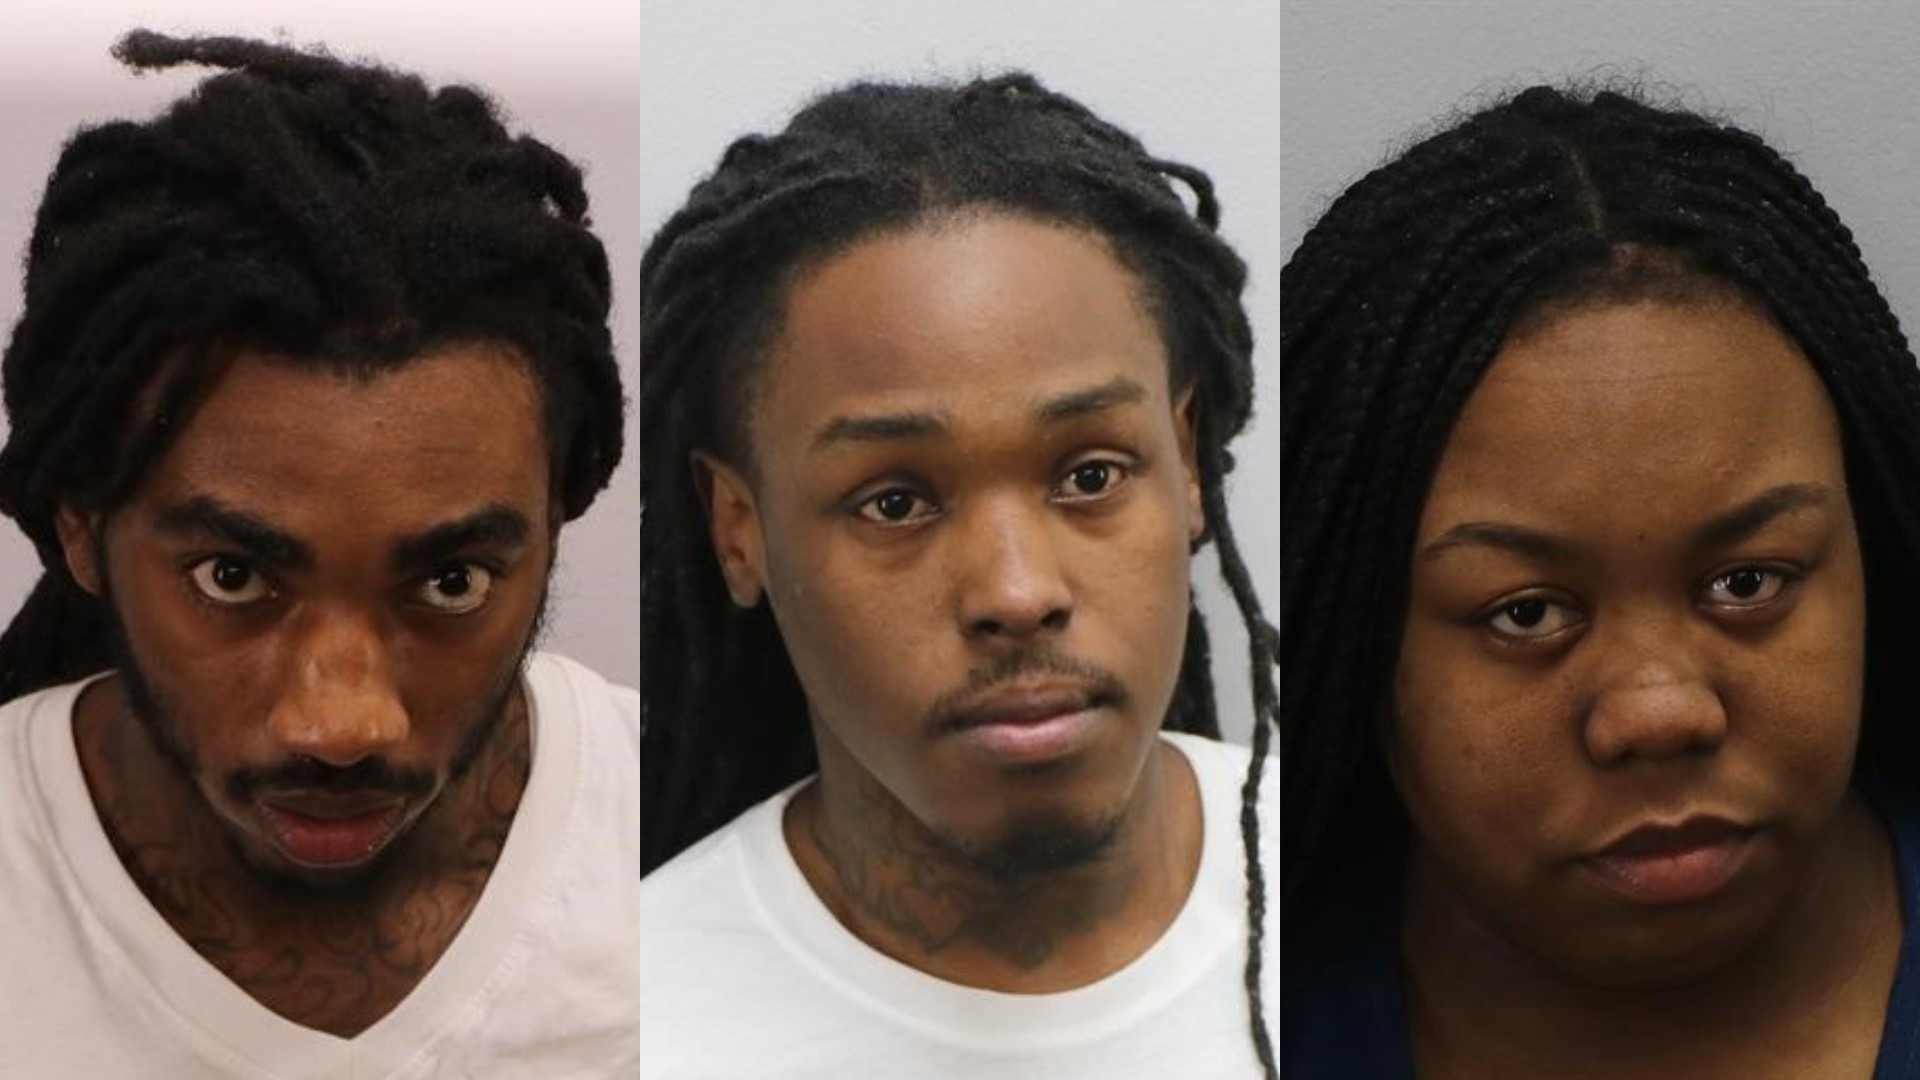 Toriyon Cook, Jerry Davis and Jakyra Epperson arrested for shooting that critically injured 8-year-old Landyn Davis in Virginia Beach